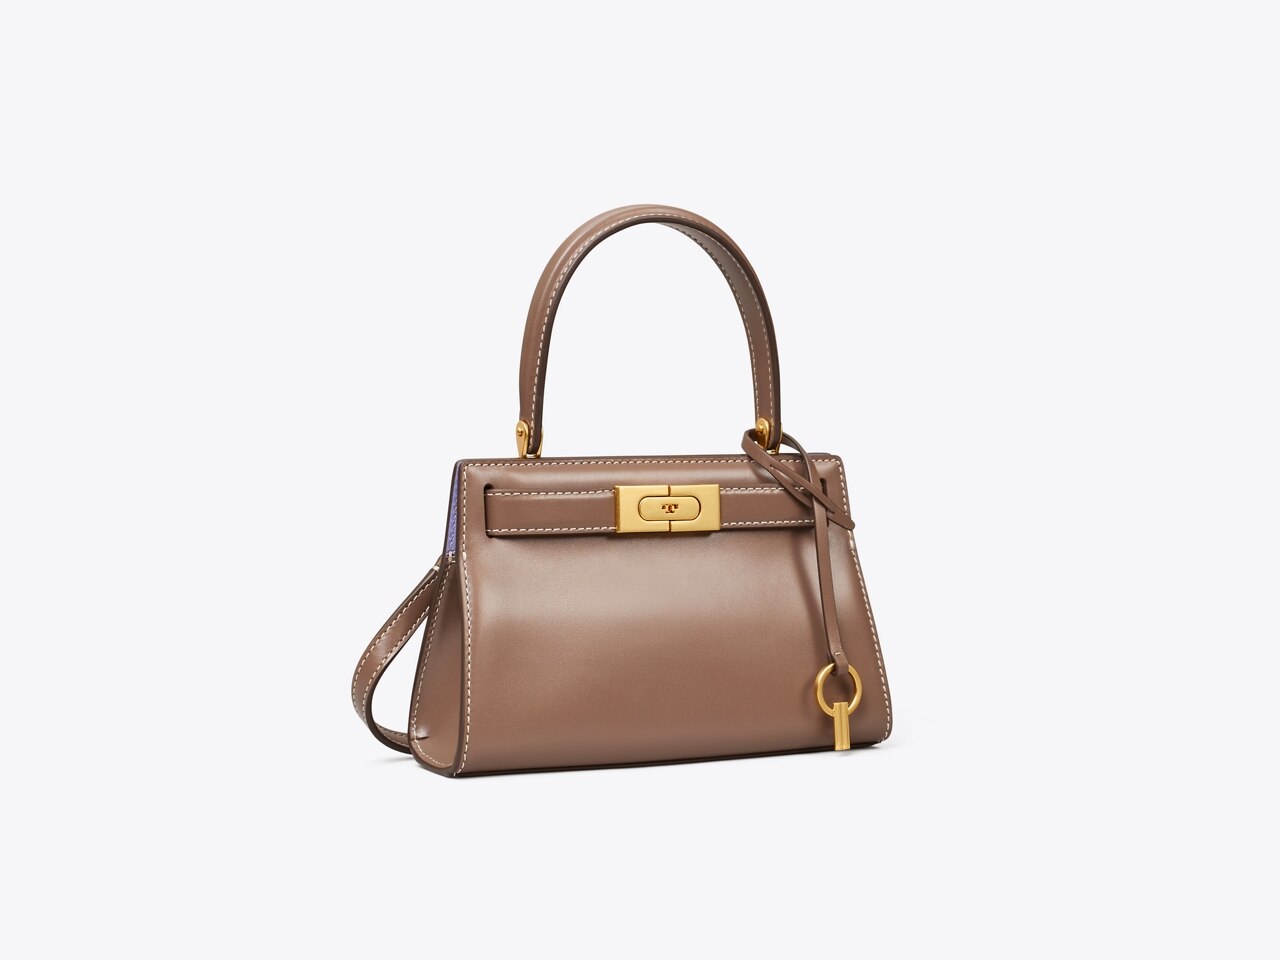 Tory Burch Lee Radziwill Petite Bag in Brown Moose Leather ref